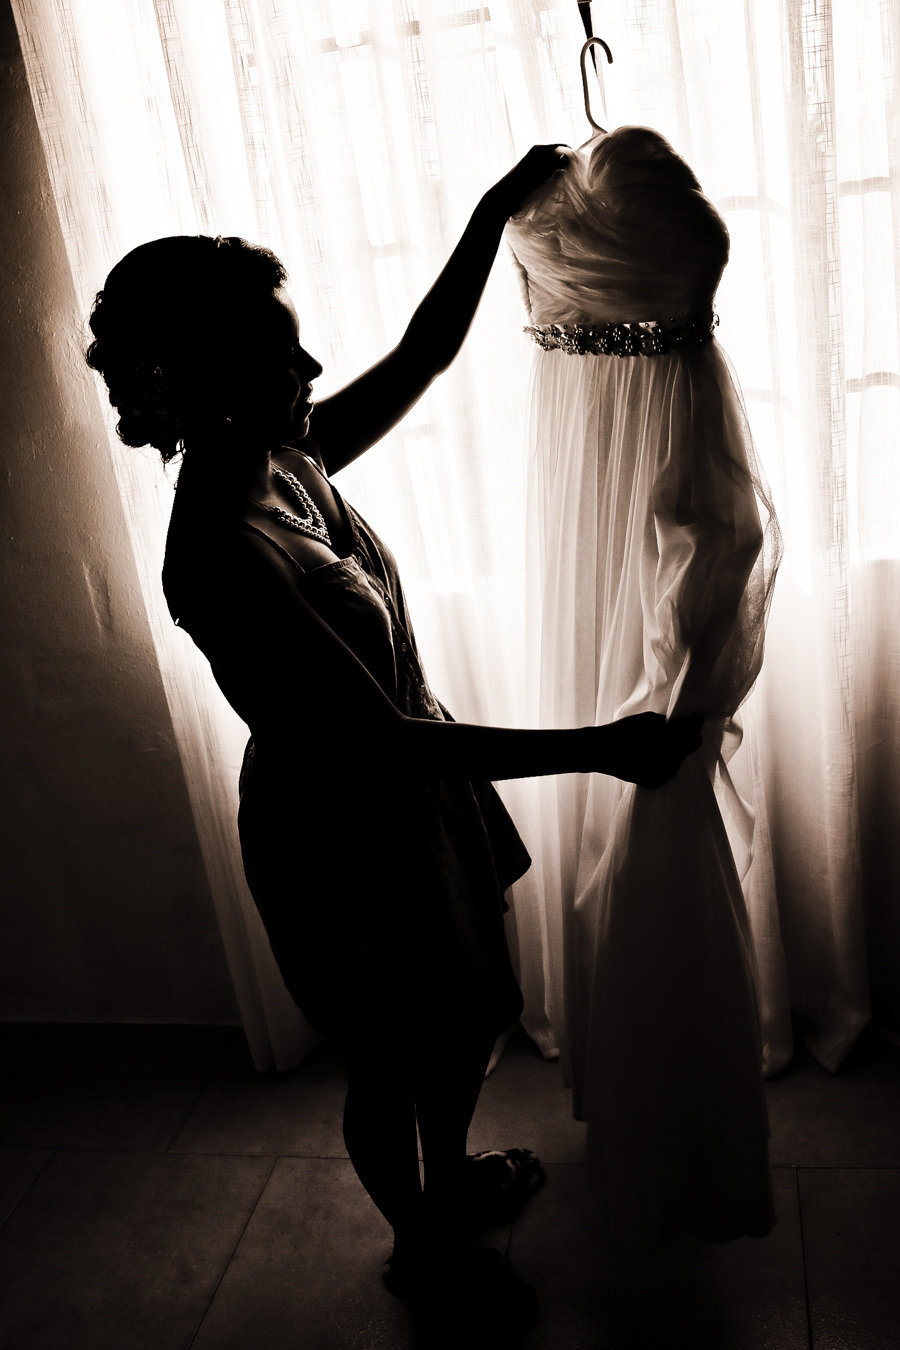 B+W silhouette of woman holding up dress. Photo by Ross Photography, Trinidad, W.I..